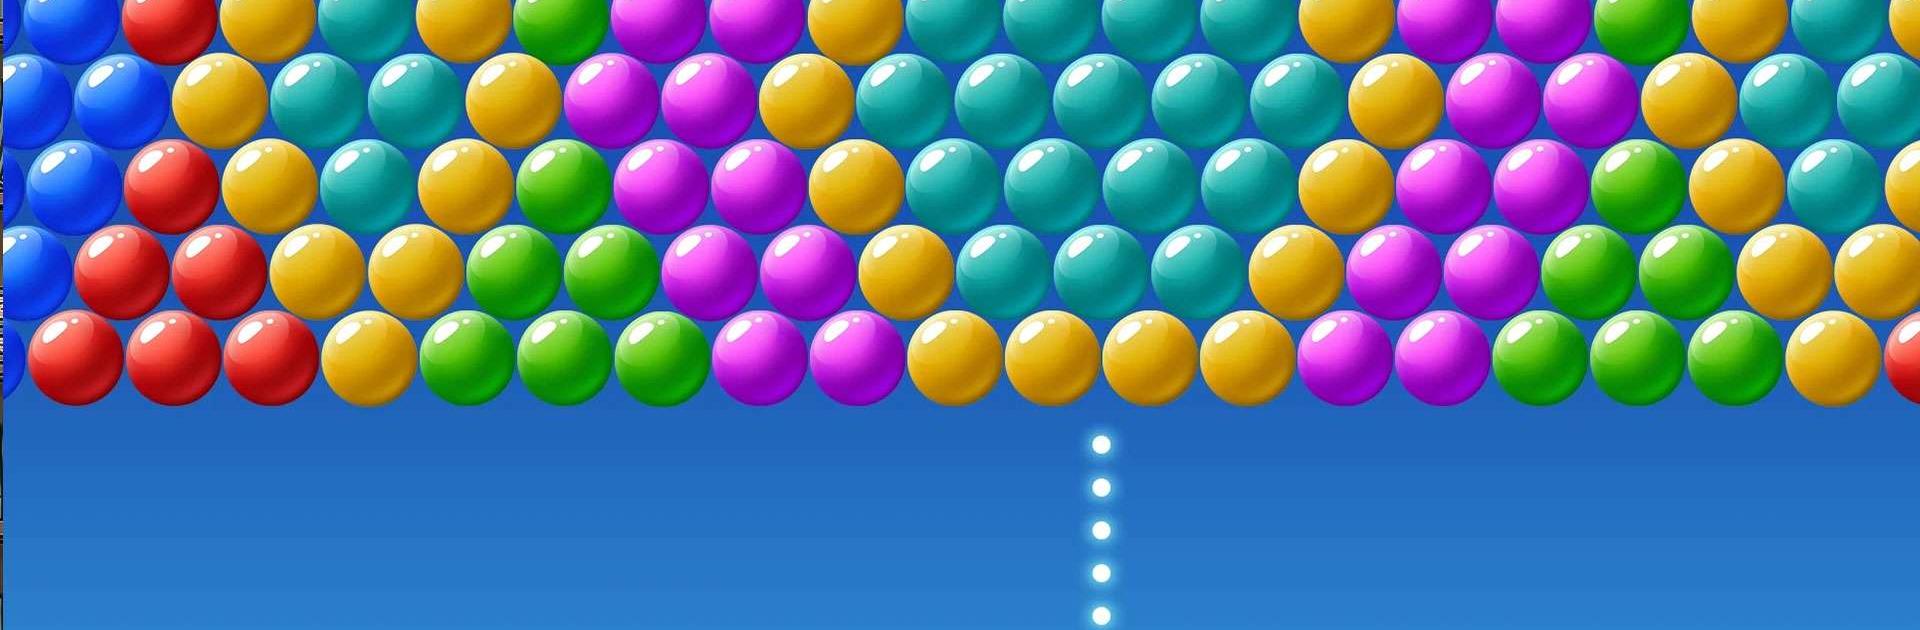 Play Bubble Shooter Relaxing Online for Free on PC & Mobile